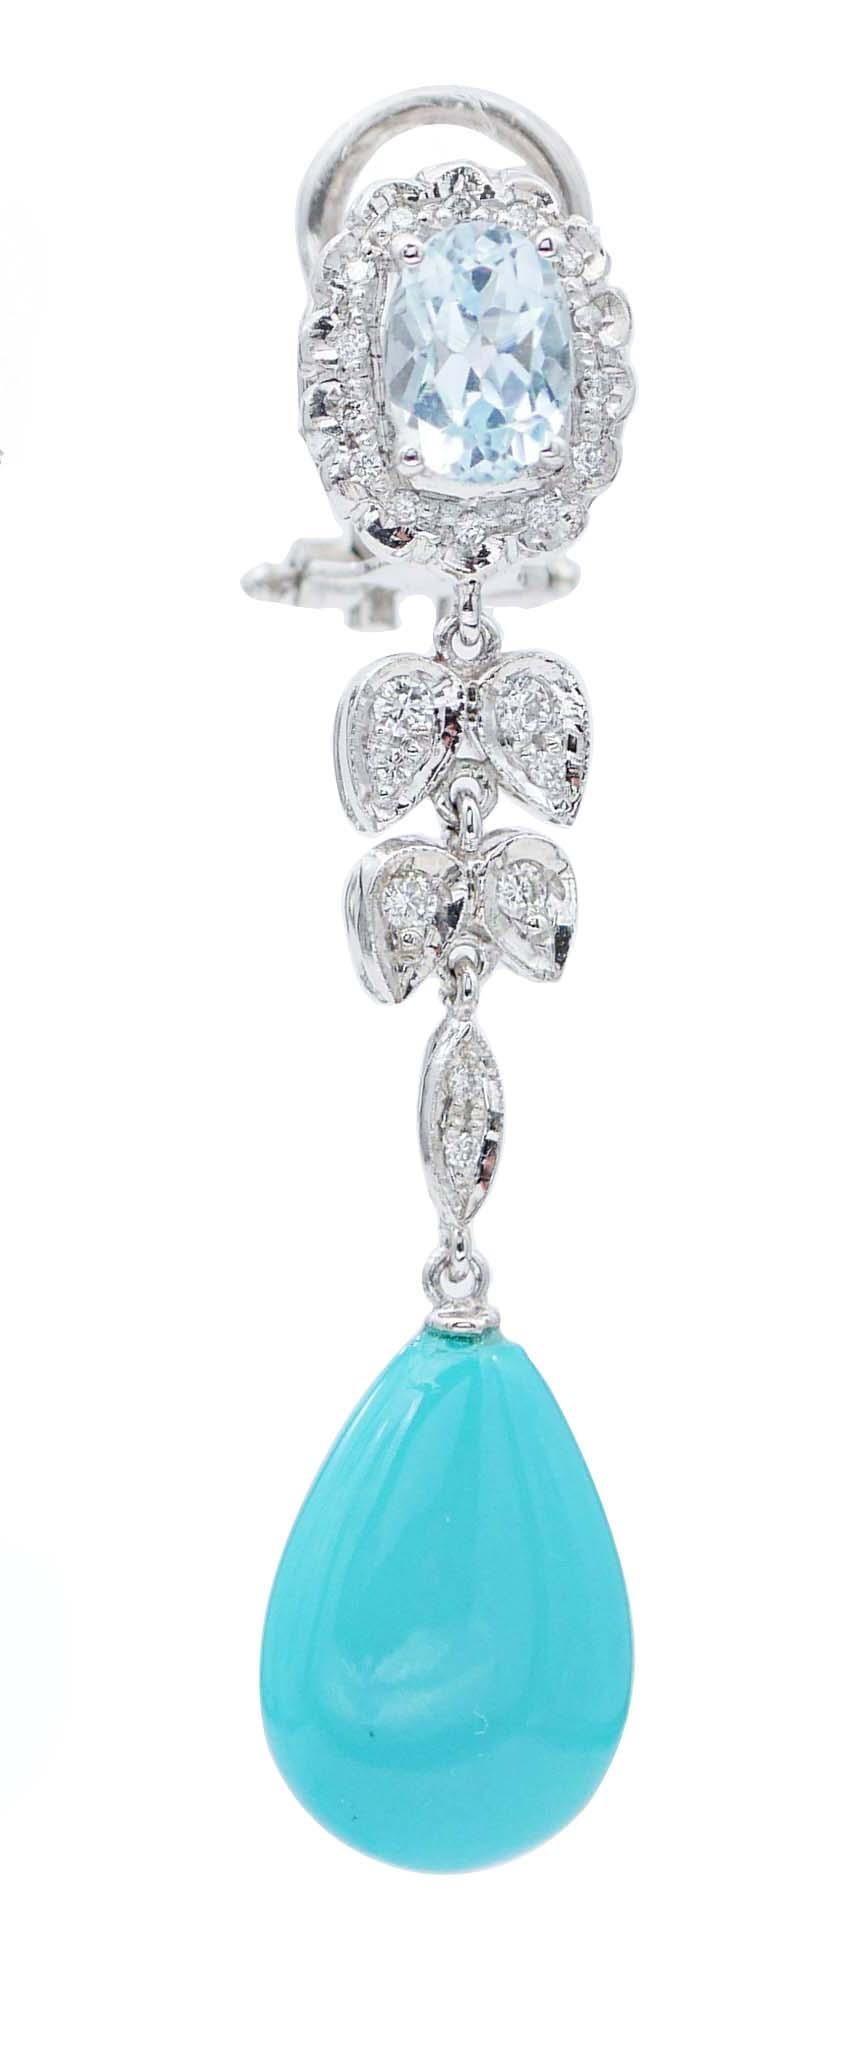 SHIPPING POLICY: 
No additional costs will be added to this order. 
Shipping costs will be totally covered by the seller (customs duties included).

Elegant dangle earrings in platinum structure mounted with an aquamarine surrounded by diamonds; in